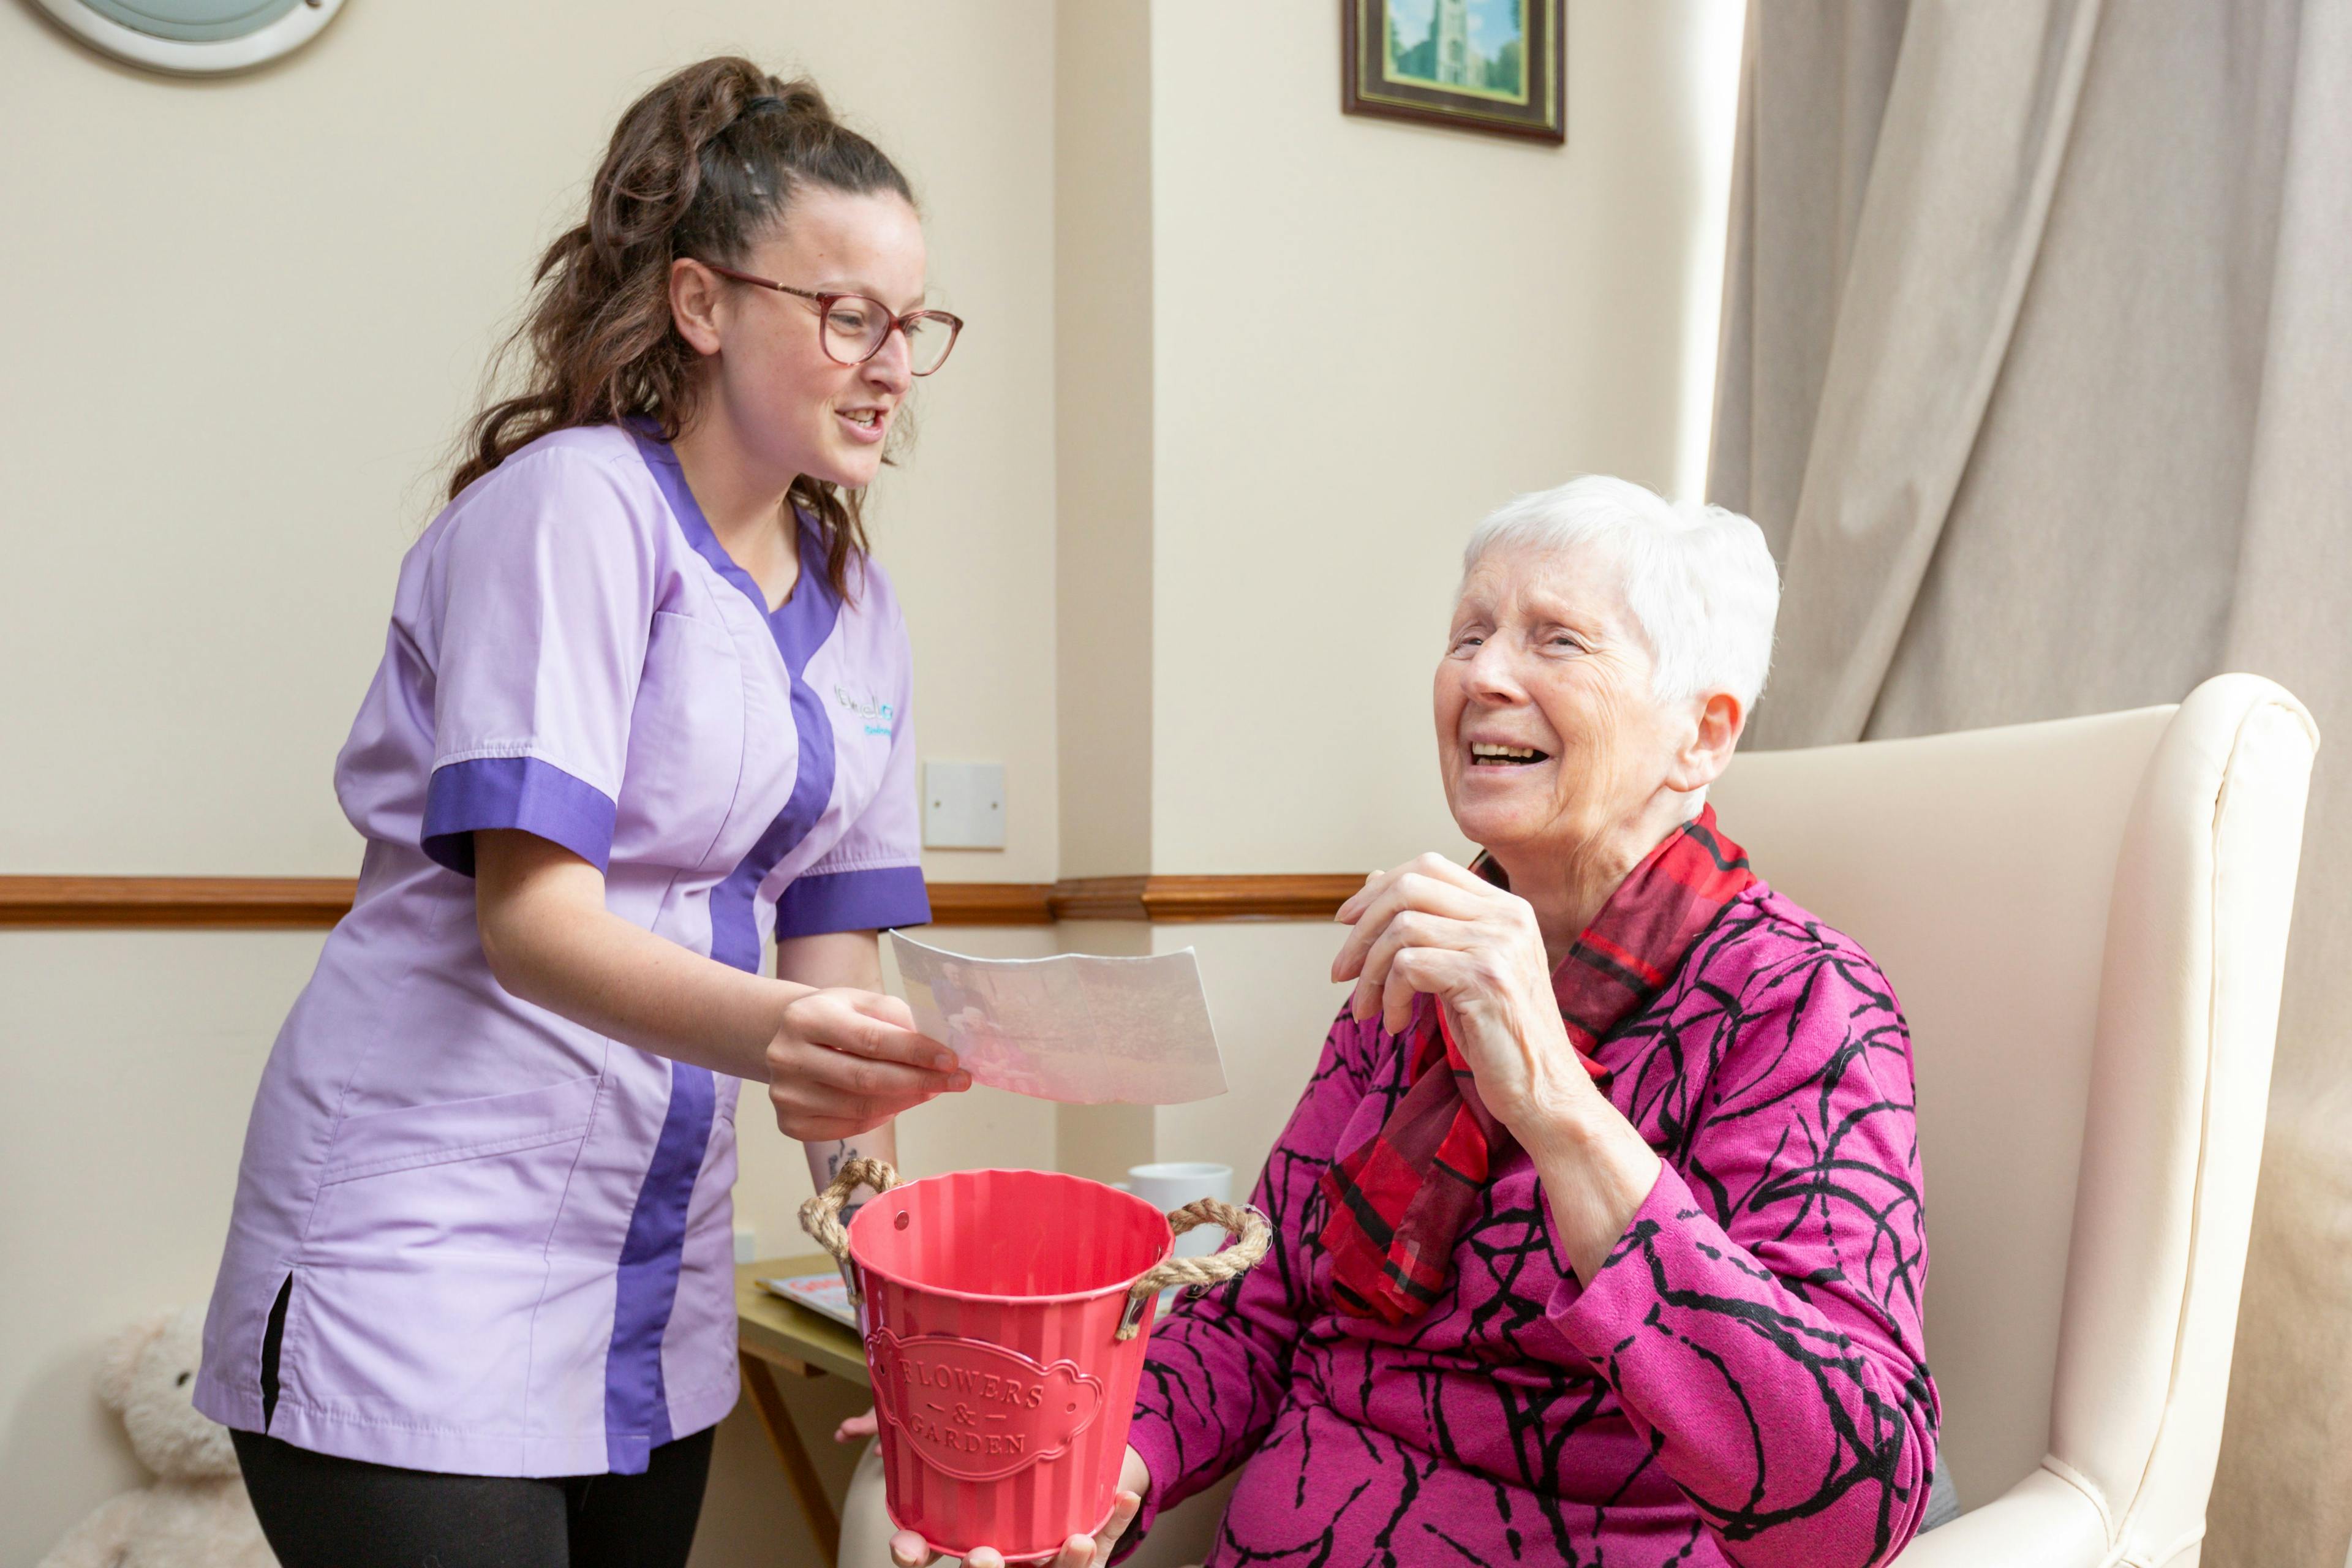 Residents at Aliwal Manor Care Home in Peterborough, Cambridgeshire